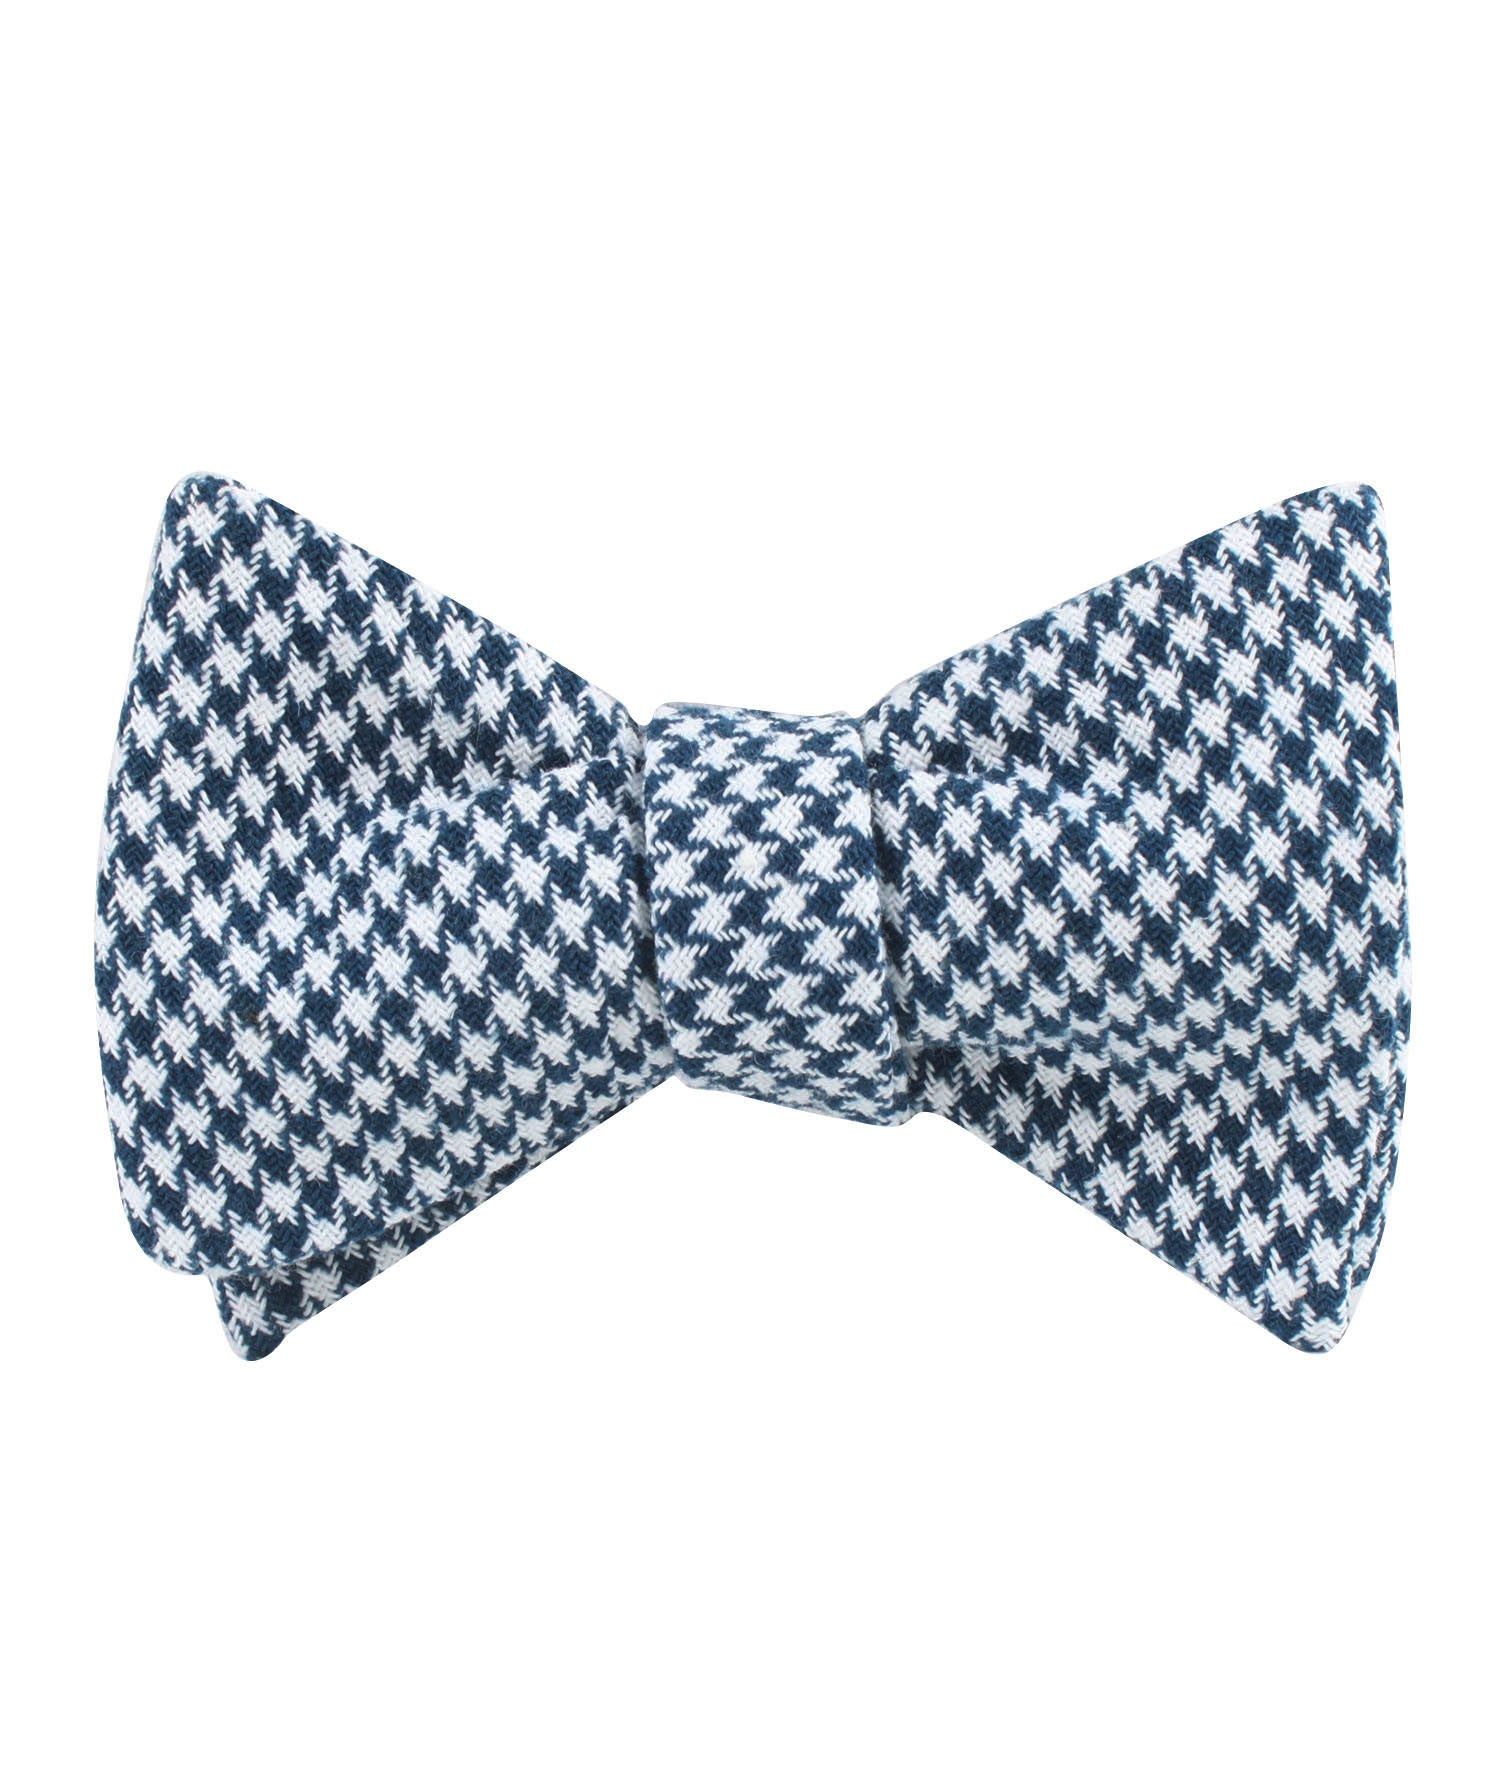 Blue Houndstooth Raw Linen Self Tied Bowtie